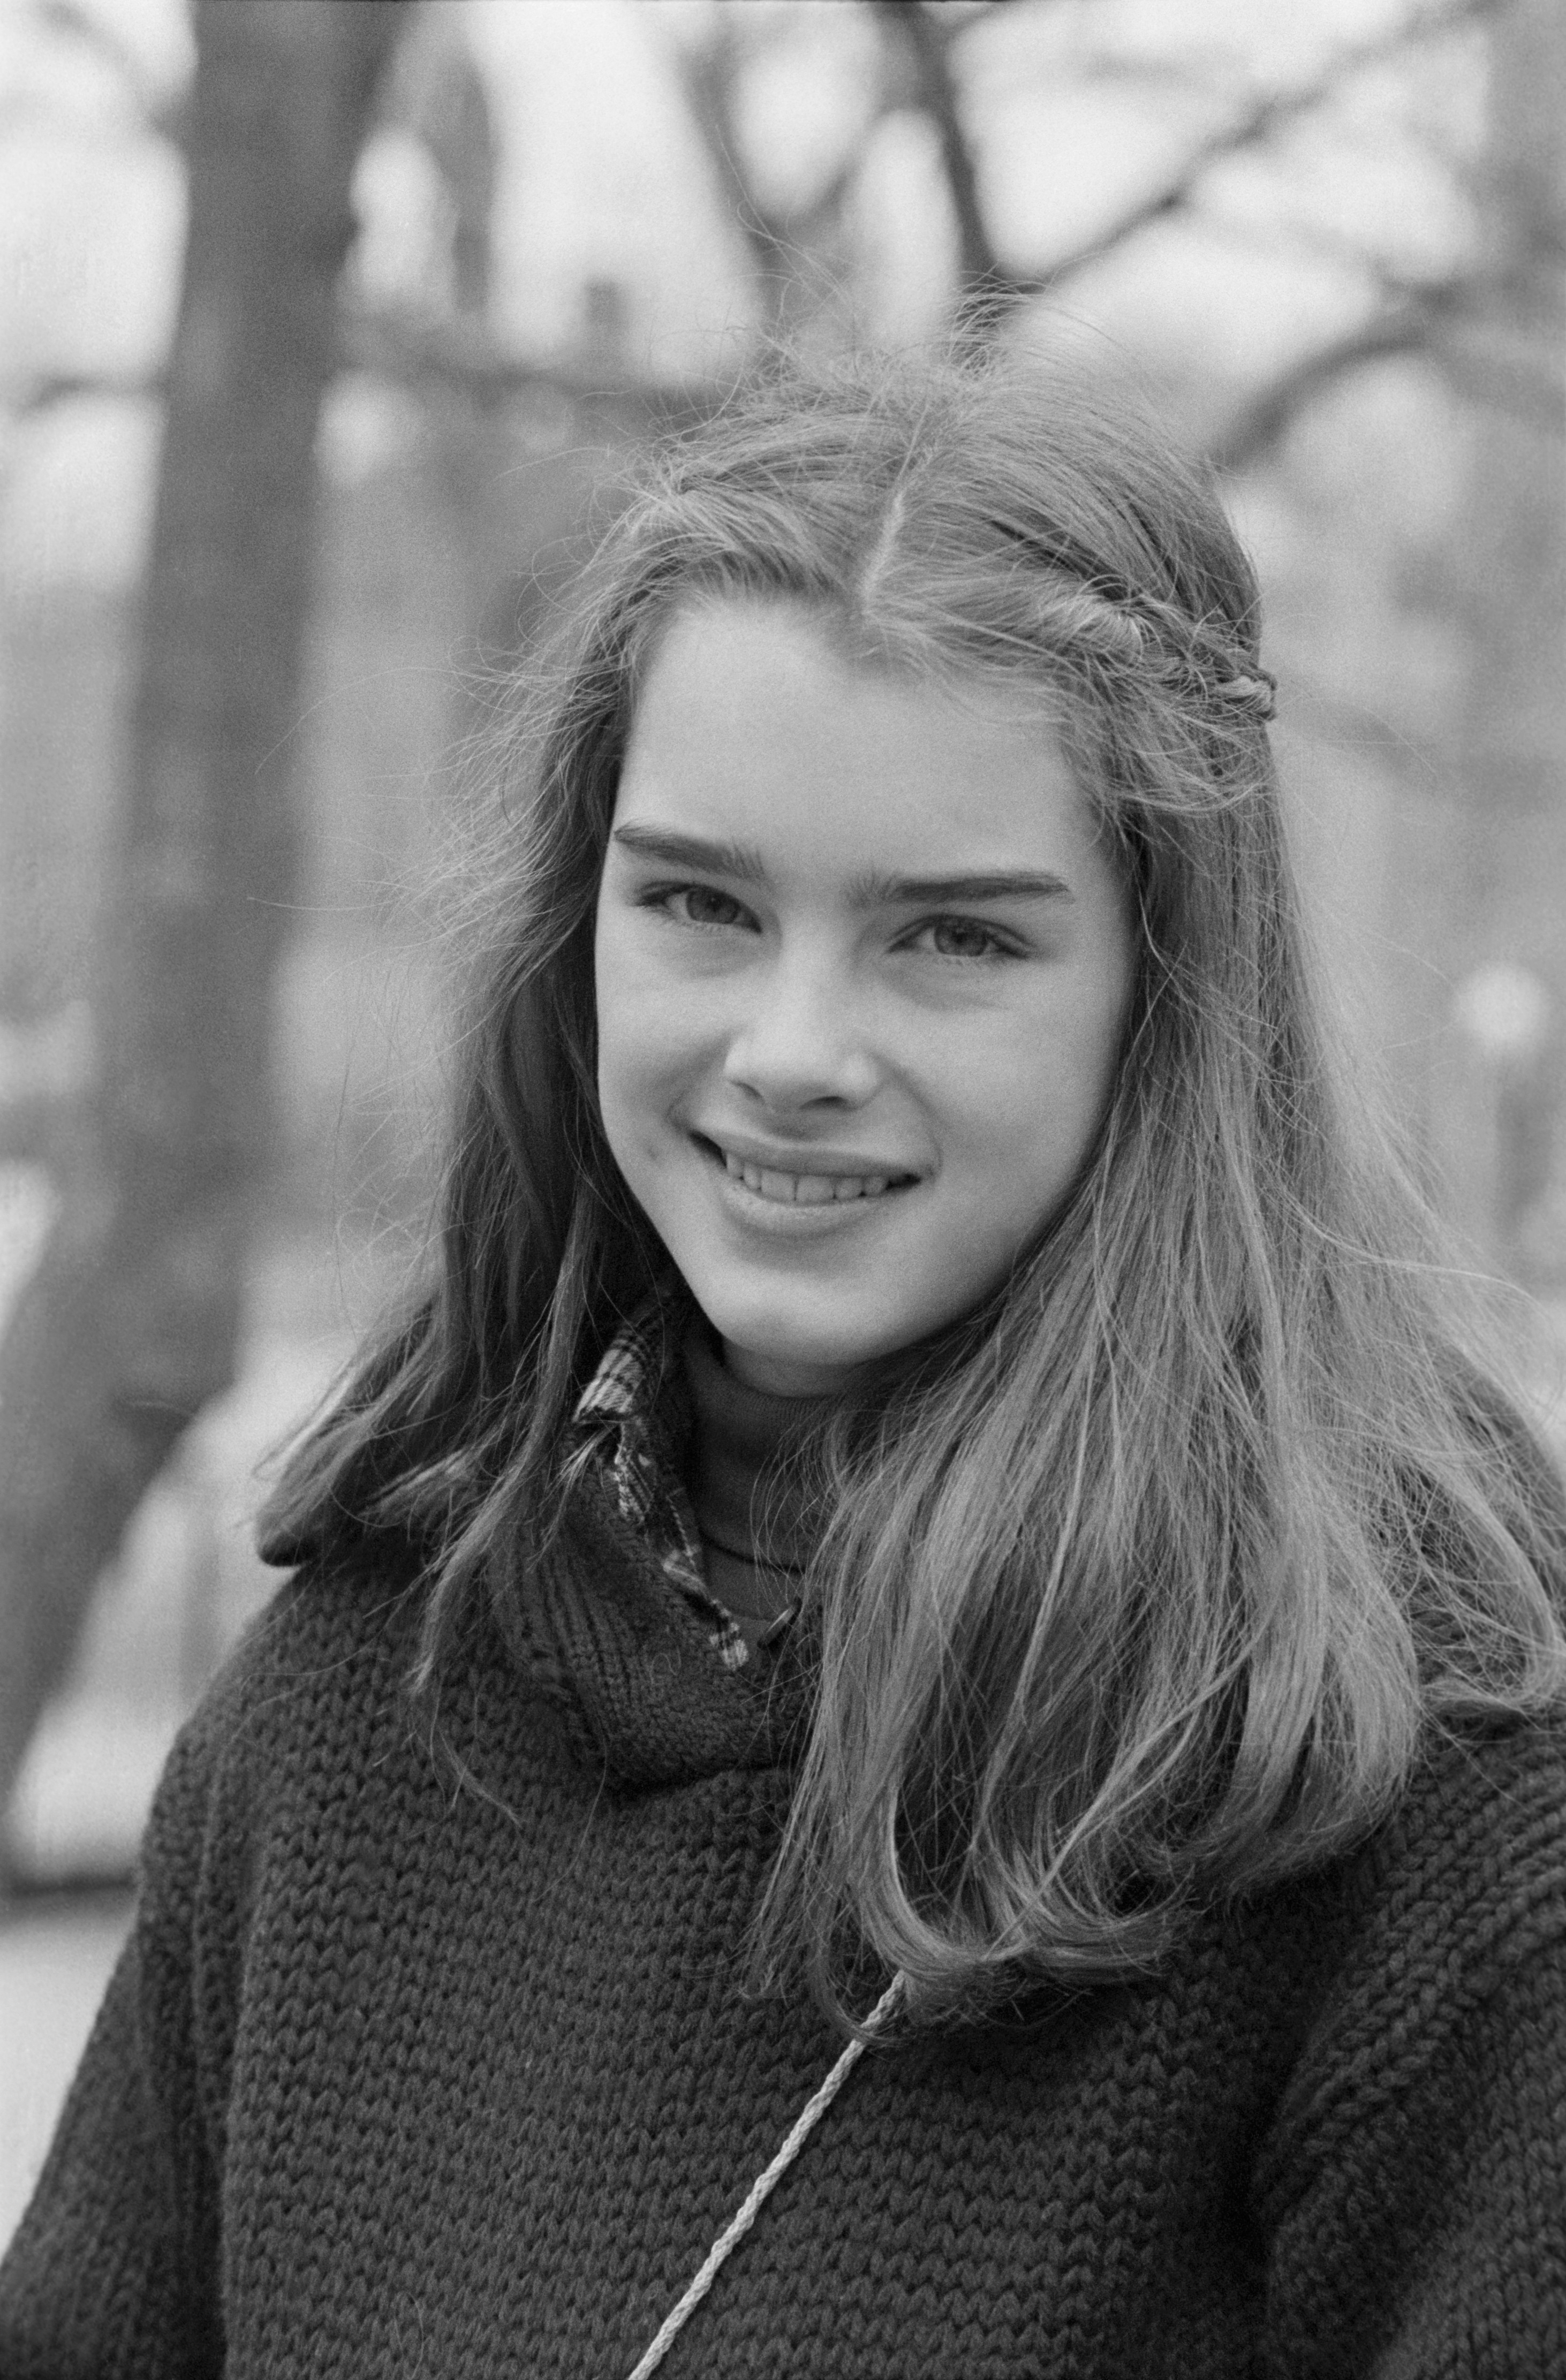 Brooke Shields à New York le 3 avril 1978 | Source : Getty Images